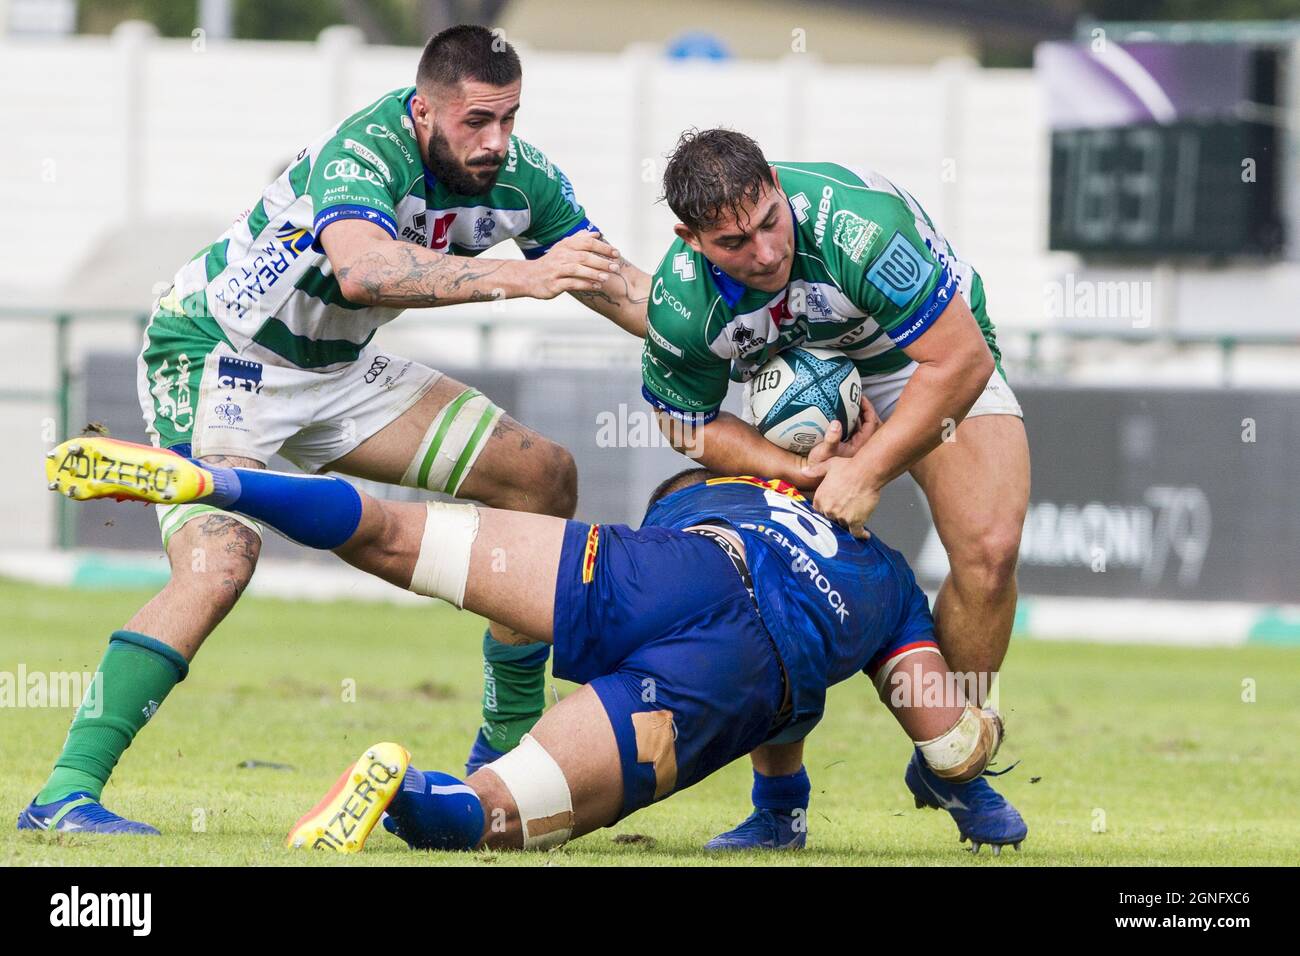 Treviso, Italy. 25th Sep, 2021. ivan nemer during Benetton Rugby vs DHL  Stormers, United Rugby Championship match in Treviso, Italy, September 25  2021 Credit: Independent Photo Agency/Alamy Live News Stock Photo - Alamy